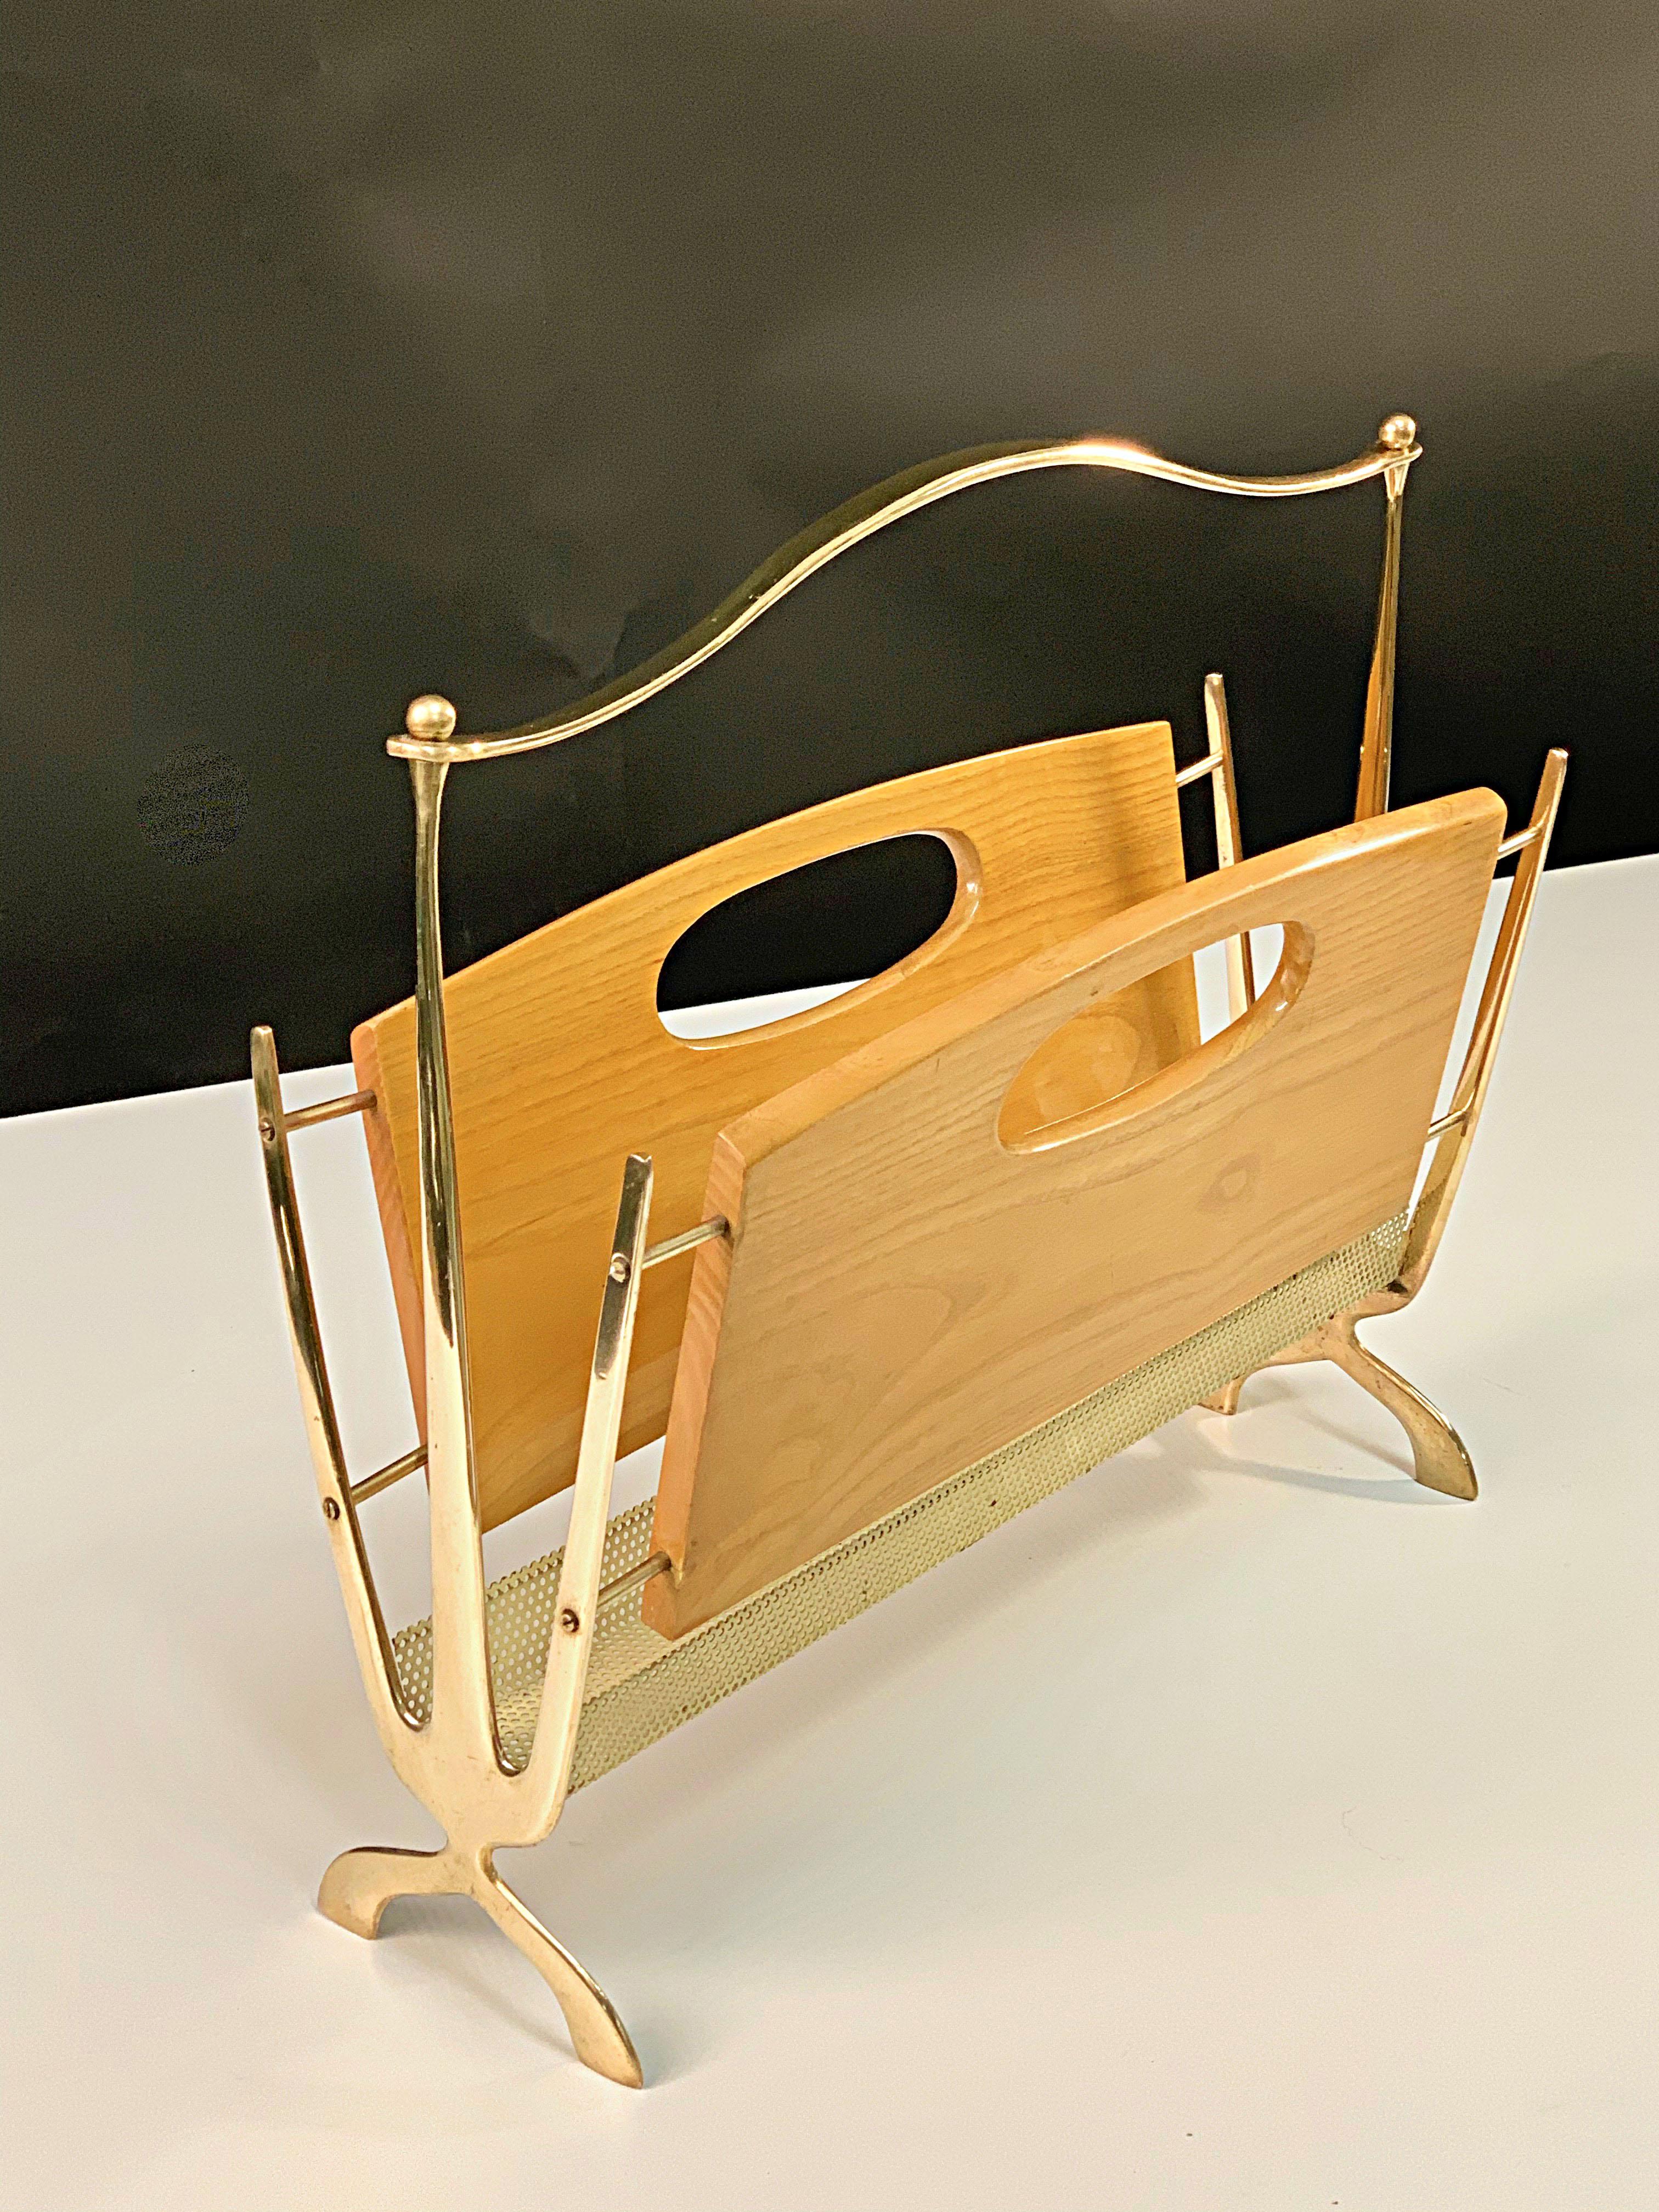 Maison Baguès Midcentury Brass and Chestnut Wood French Magazine Rack, 1950s For Sale 8